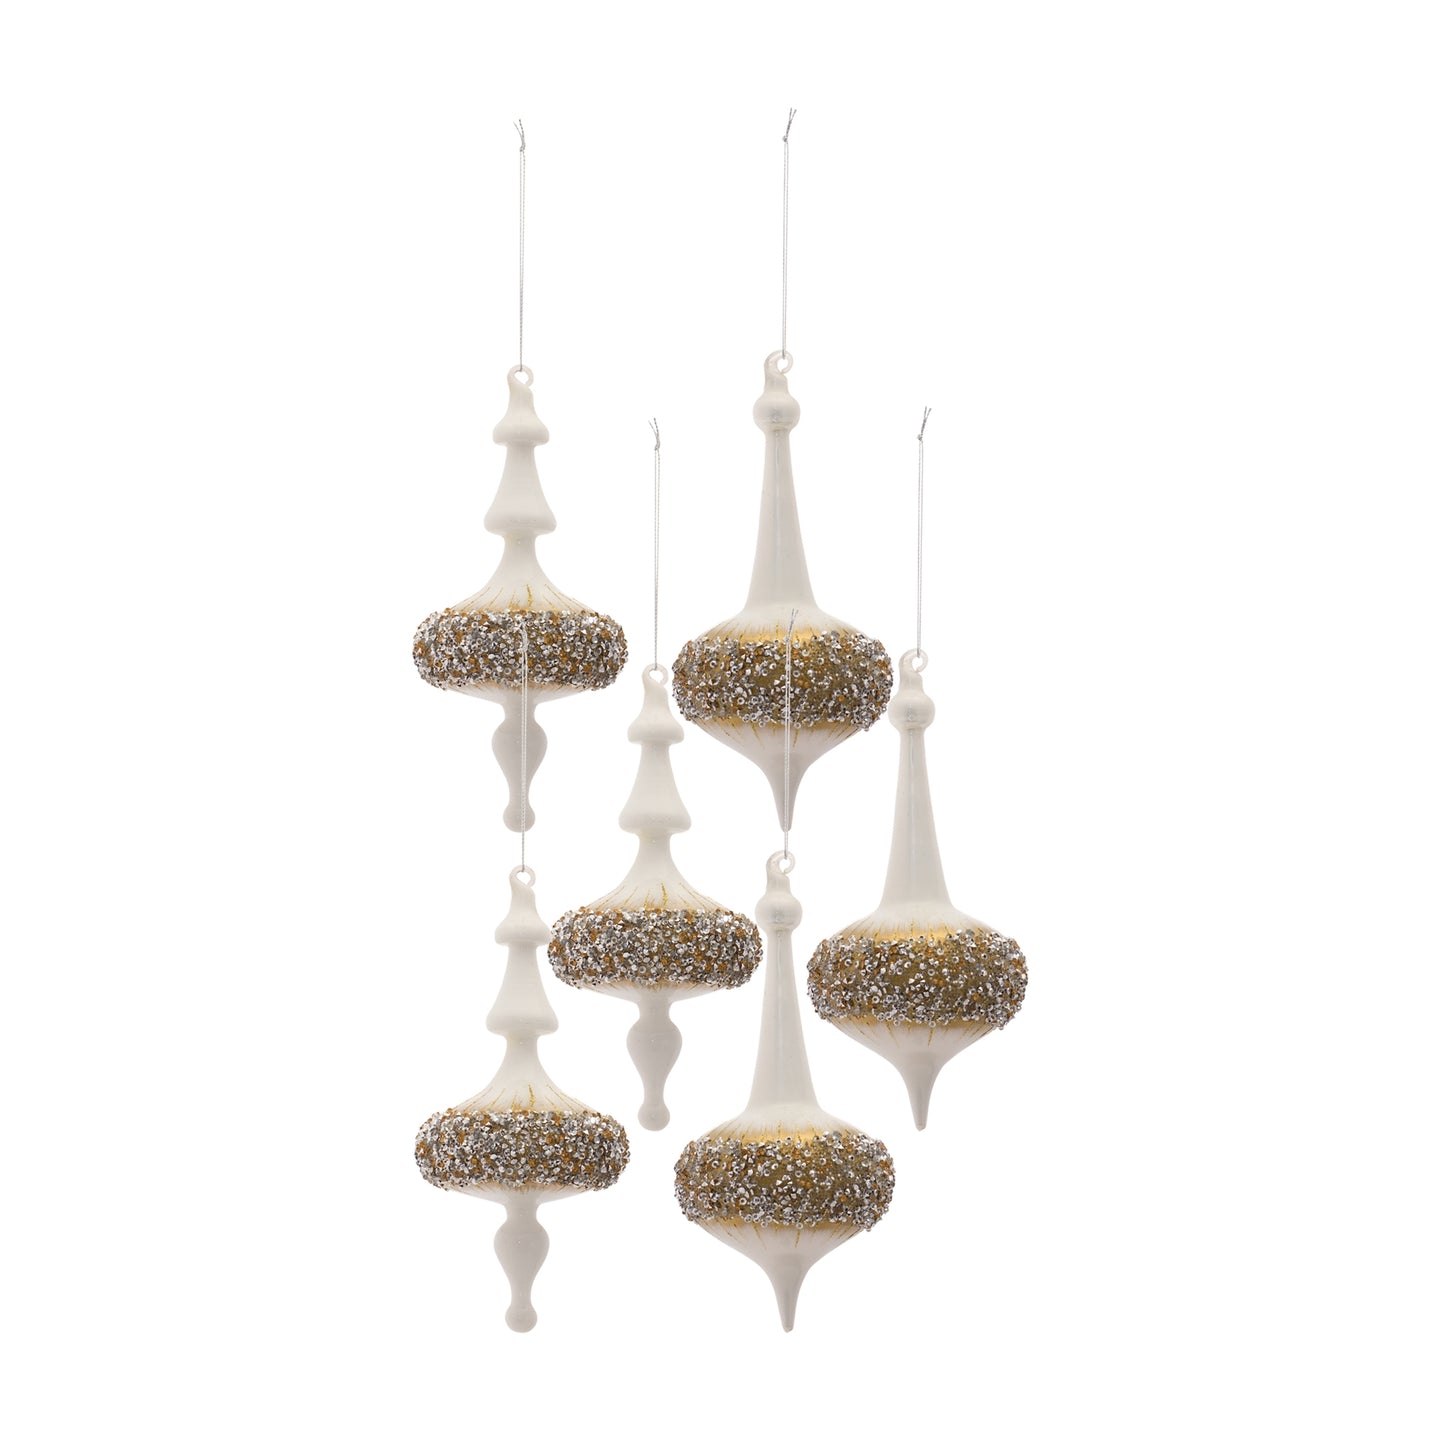 Modern Glass Finial Ornament with Gold Bead Accent (Set of 6)